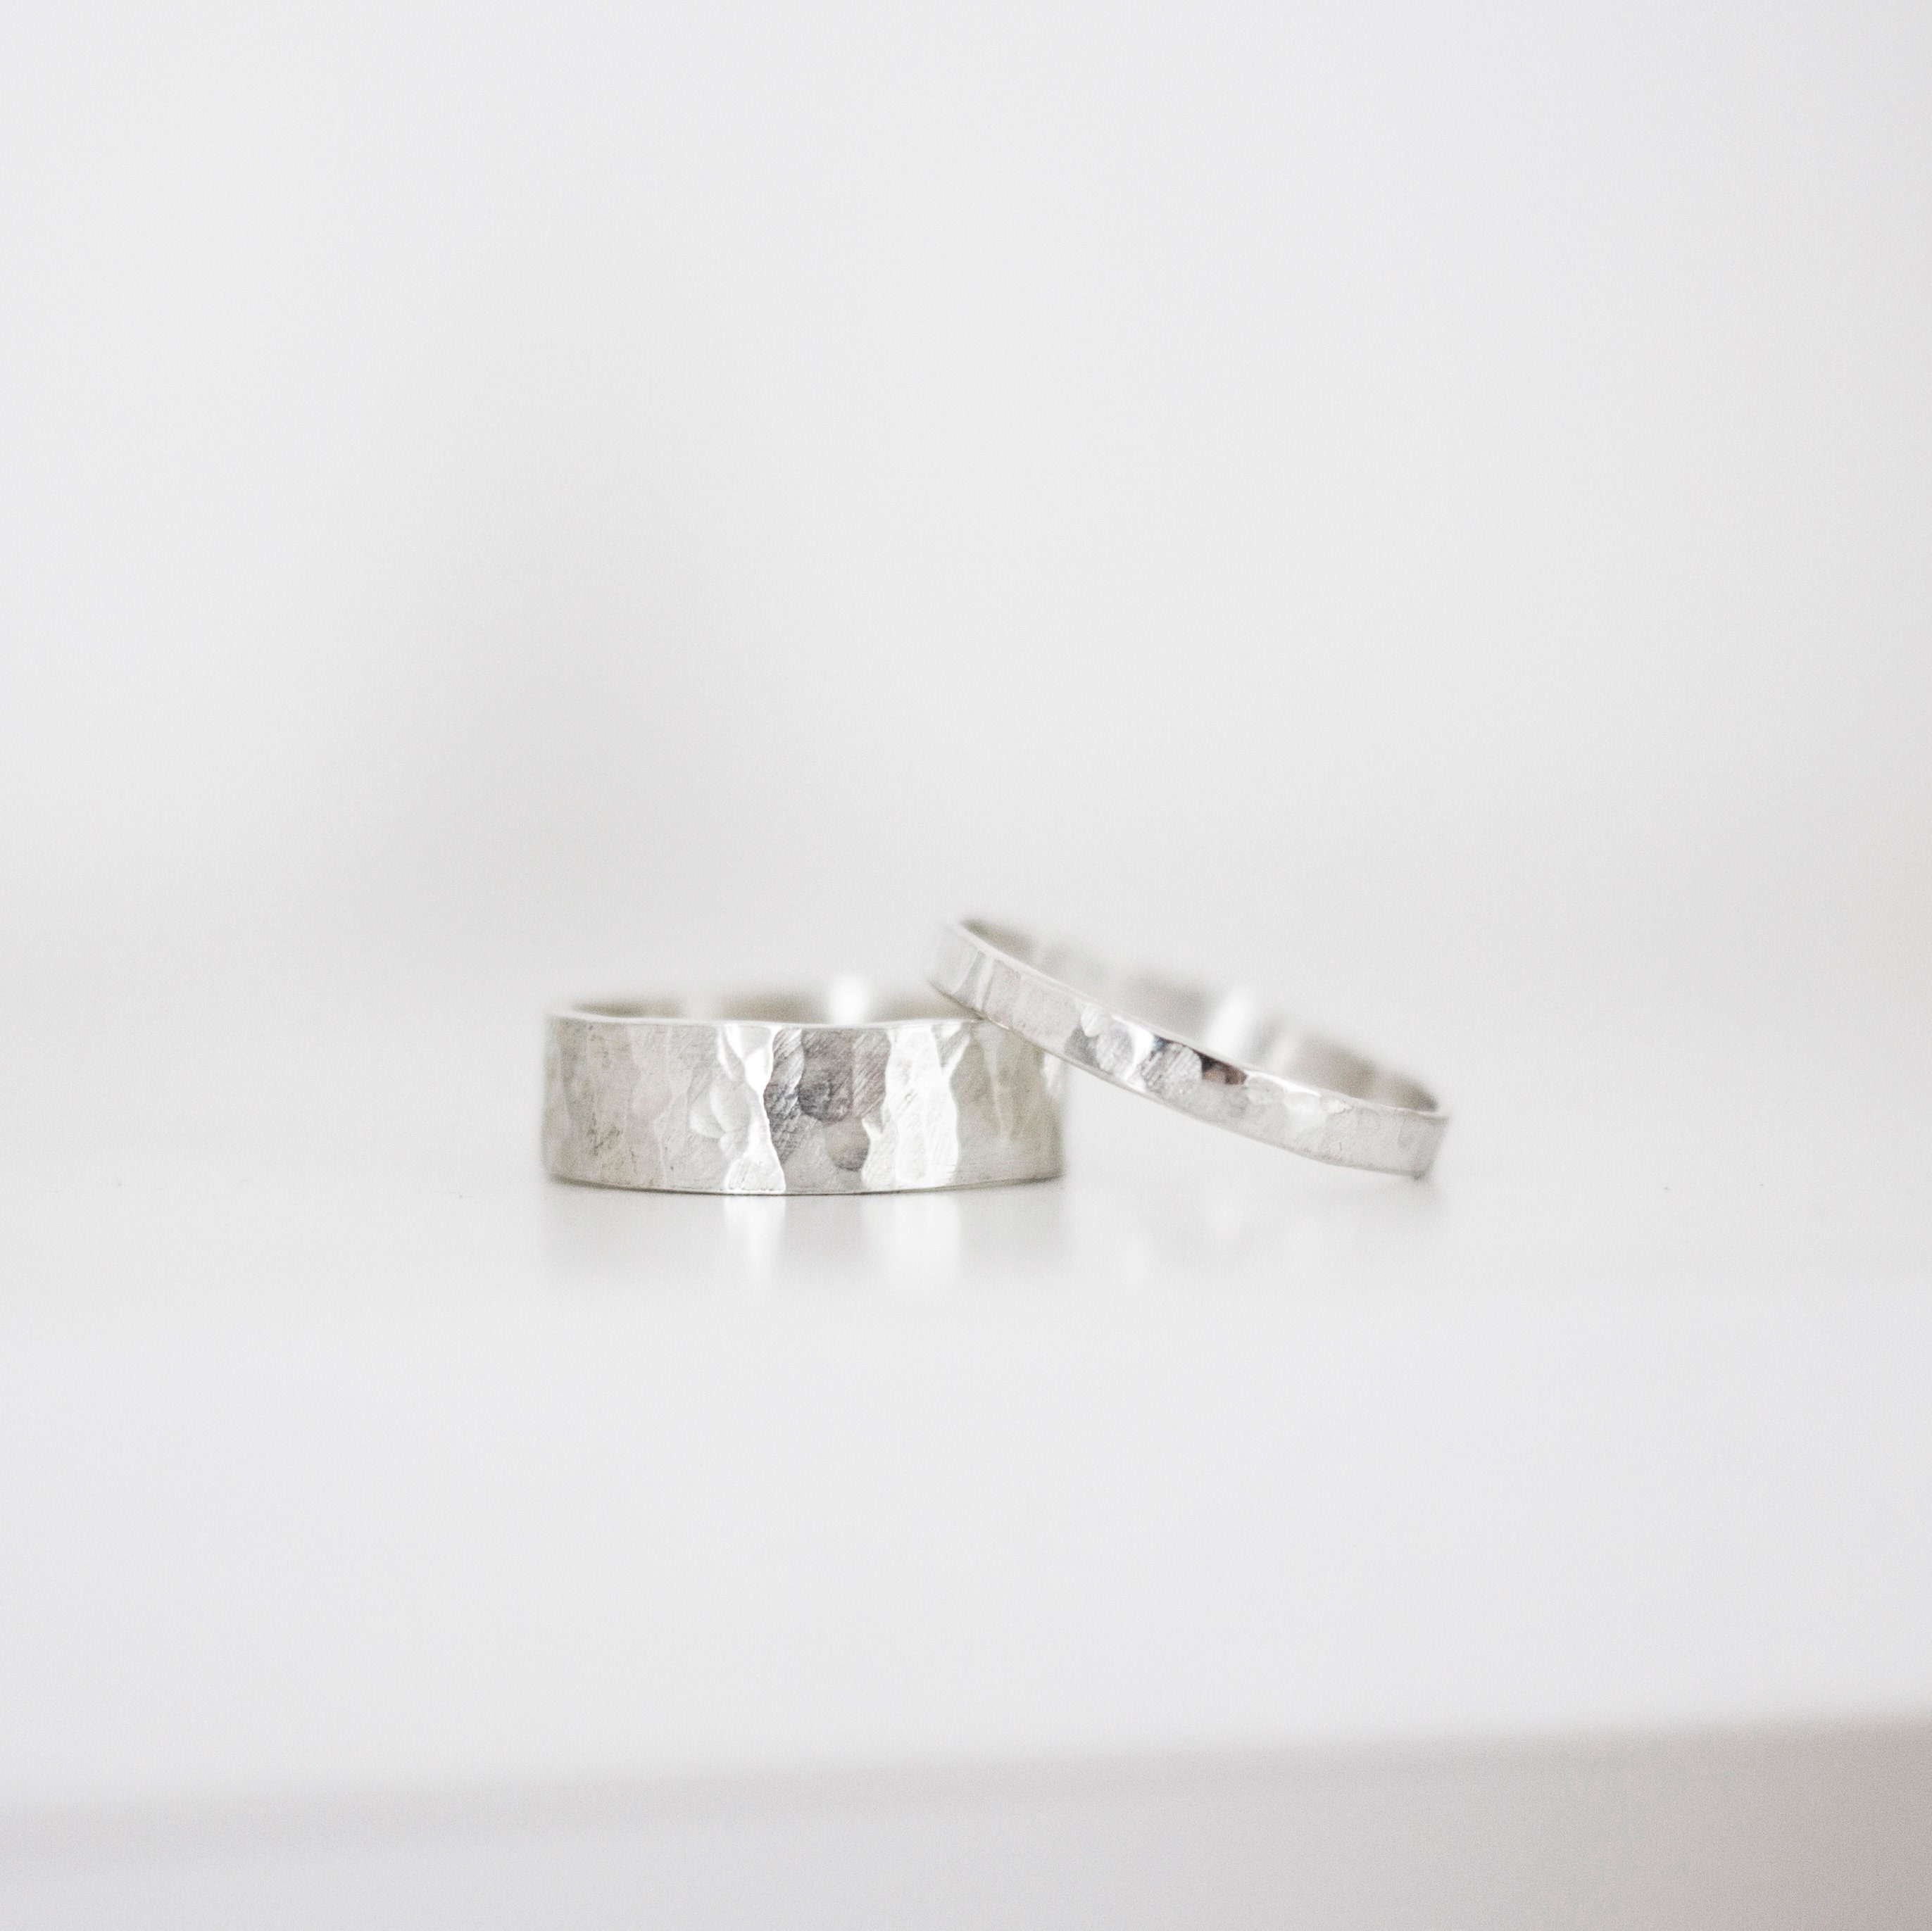 sterling Silver Hammered Band Ring - Minimalist Handmade Jewellery